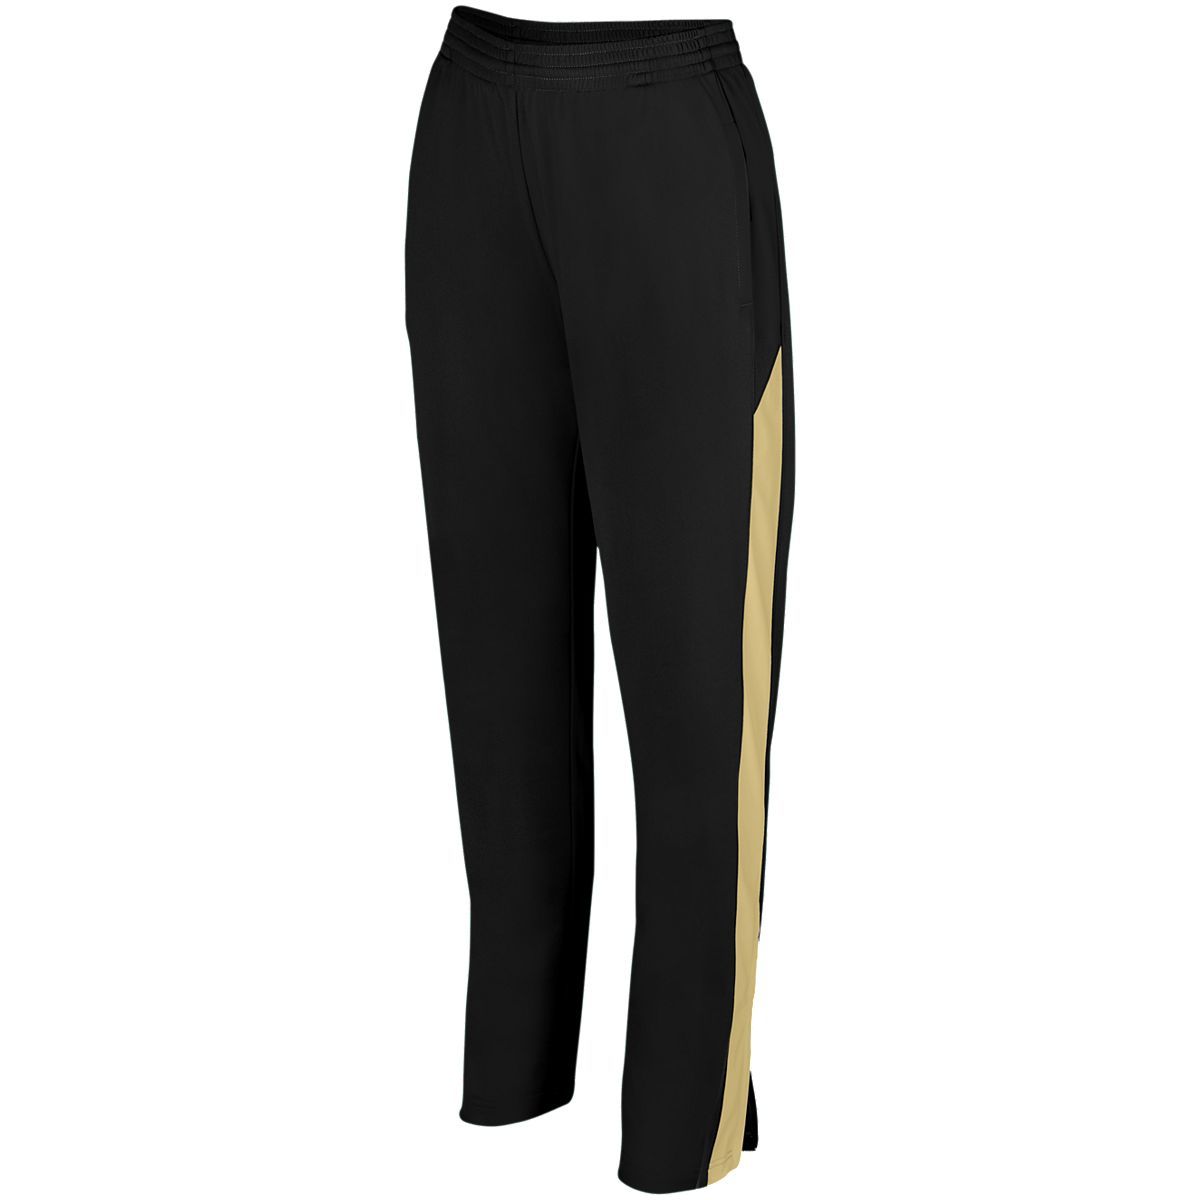 Augusta Sportswear Ladies Medalist Pant 2.0 in Black/Vegas Gold  -Part of the Ladies, Ladies-Pants, Pants, Augusta-Products product lines at KanaleyCreations.com